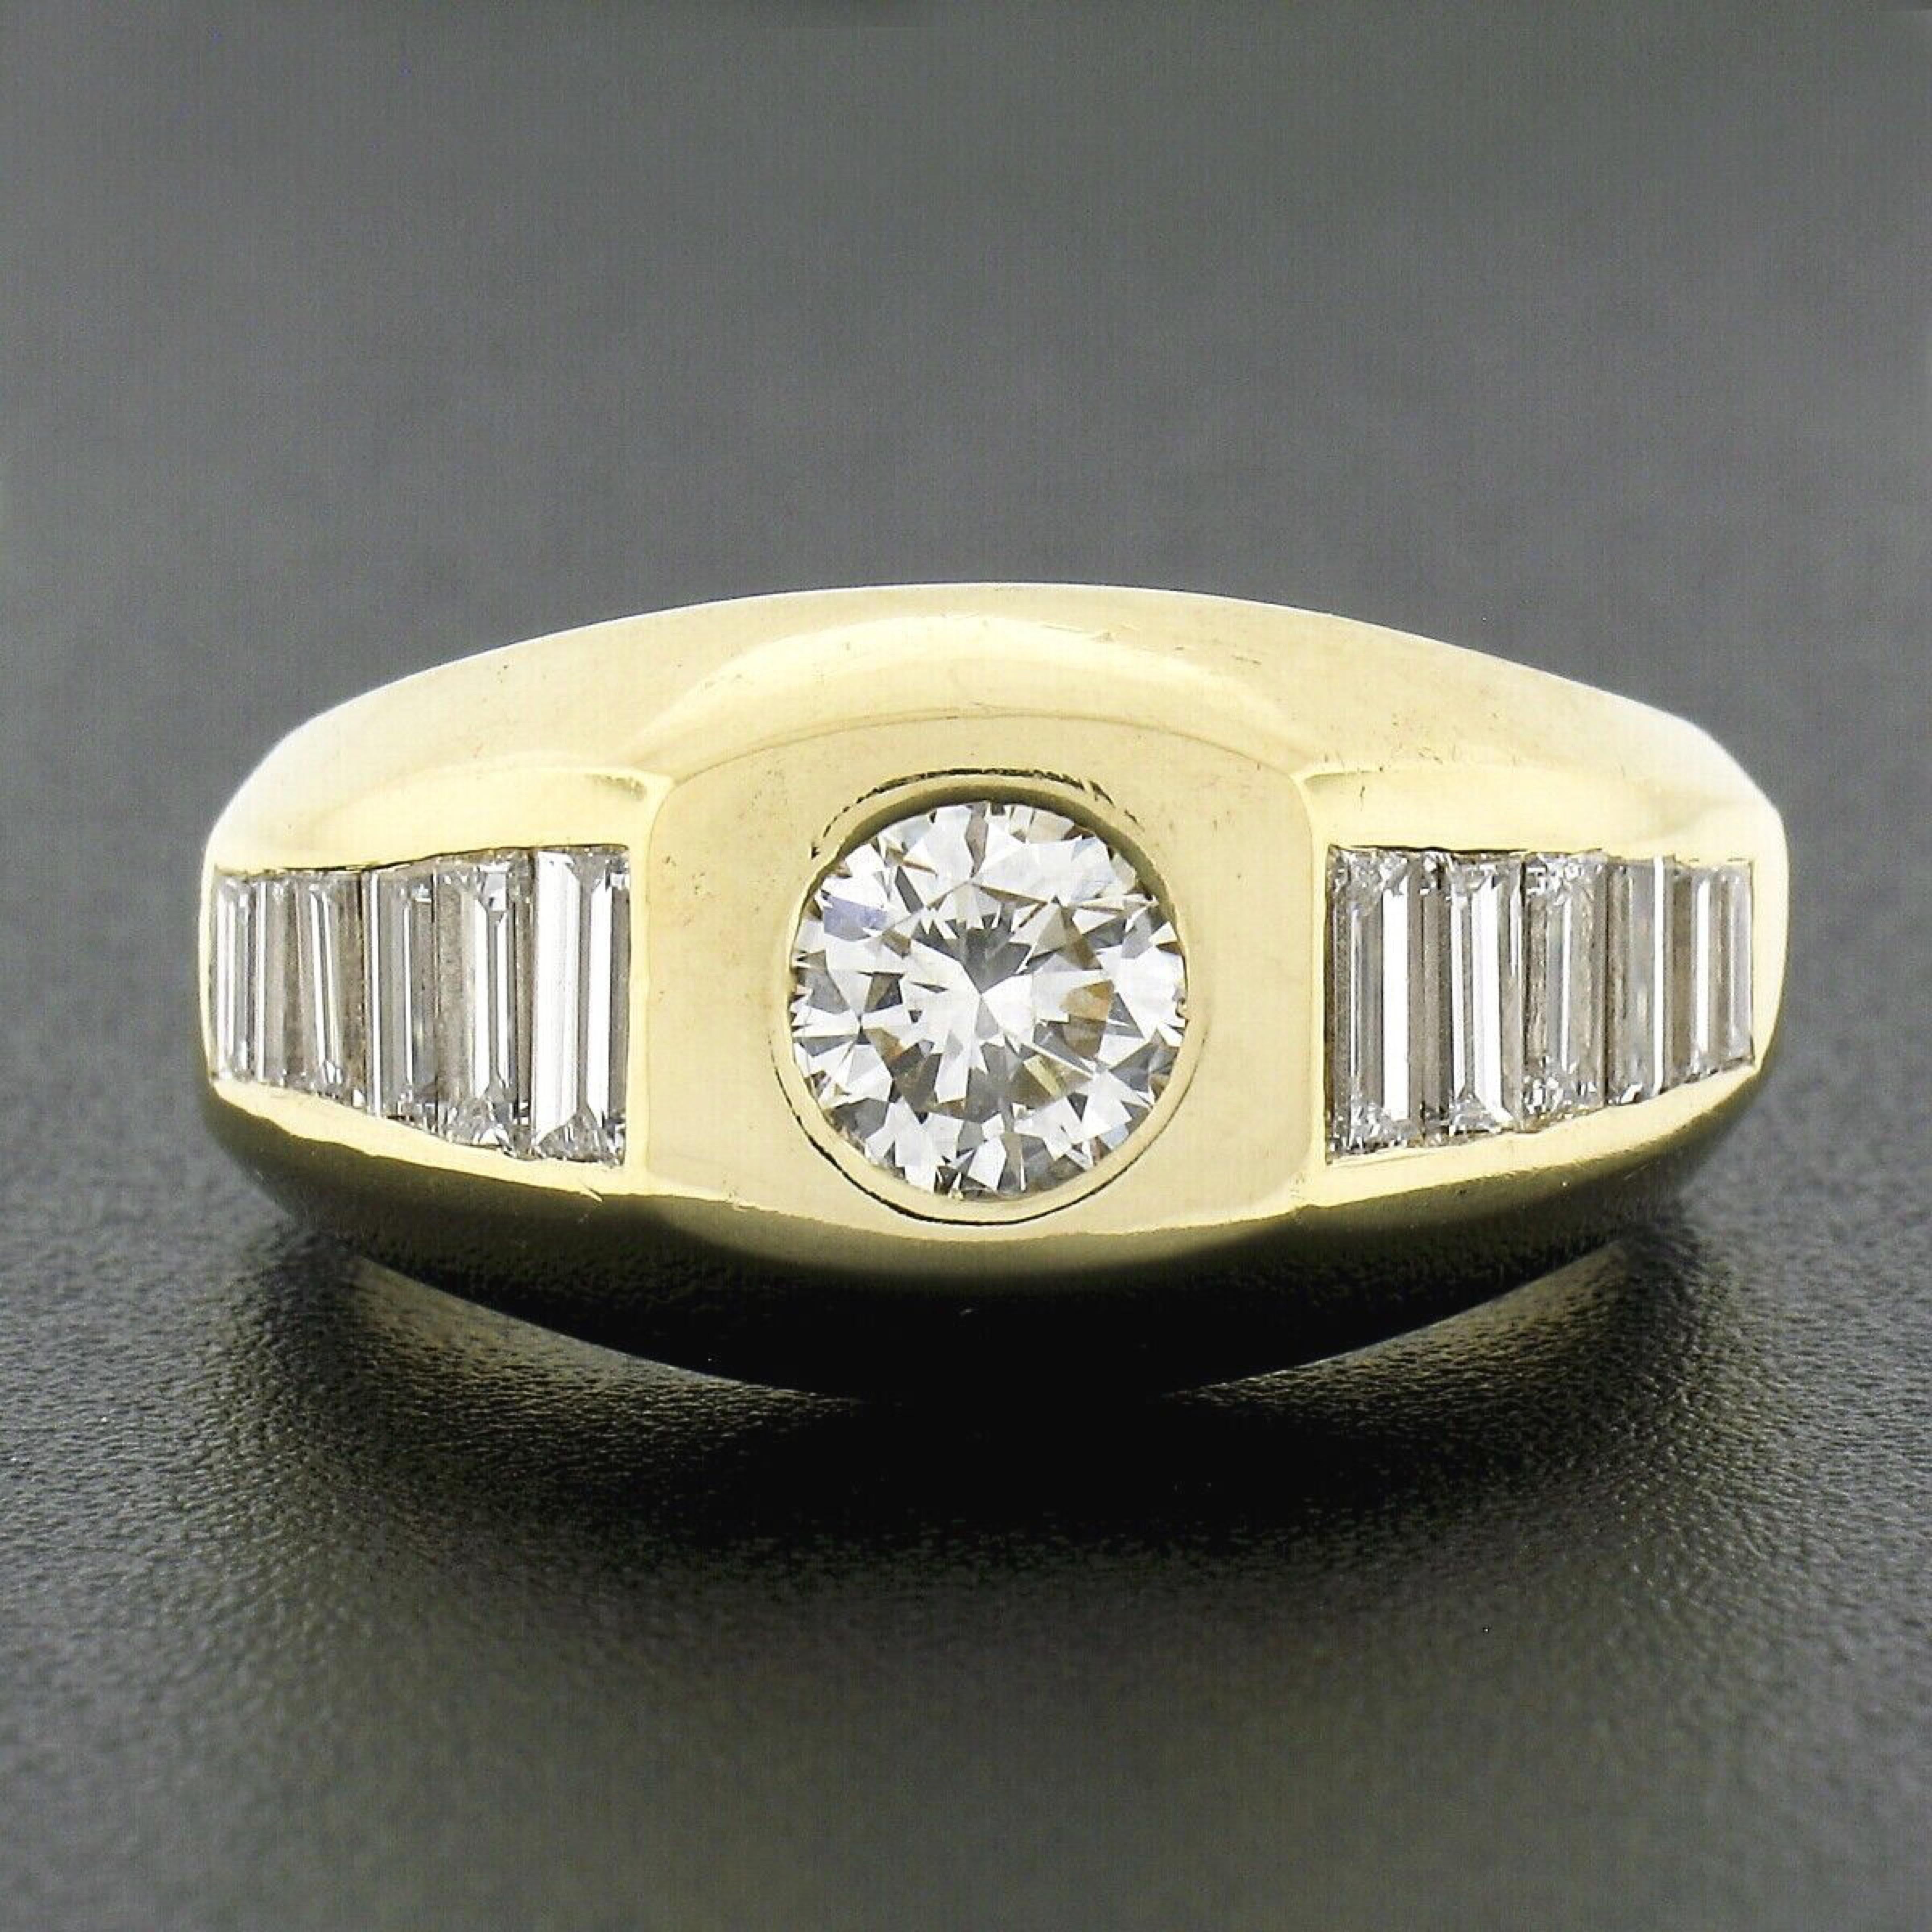 This breathtaking vintage men's band ring was crafted from solid 18k yellow gold and features a round brilliant cut diamond solitaire neatly set at its center. This fine quality diamond displays an attractive size, weighing approximately 0.75